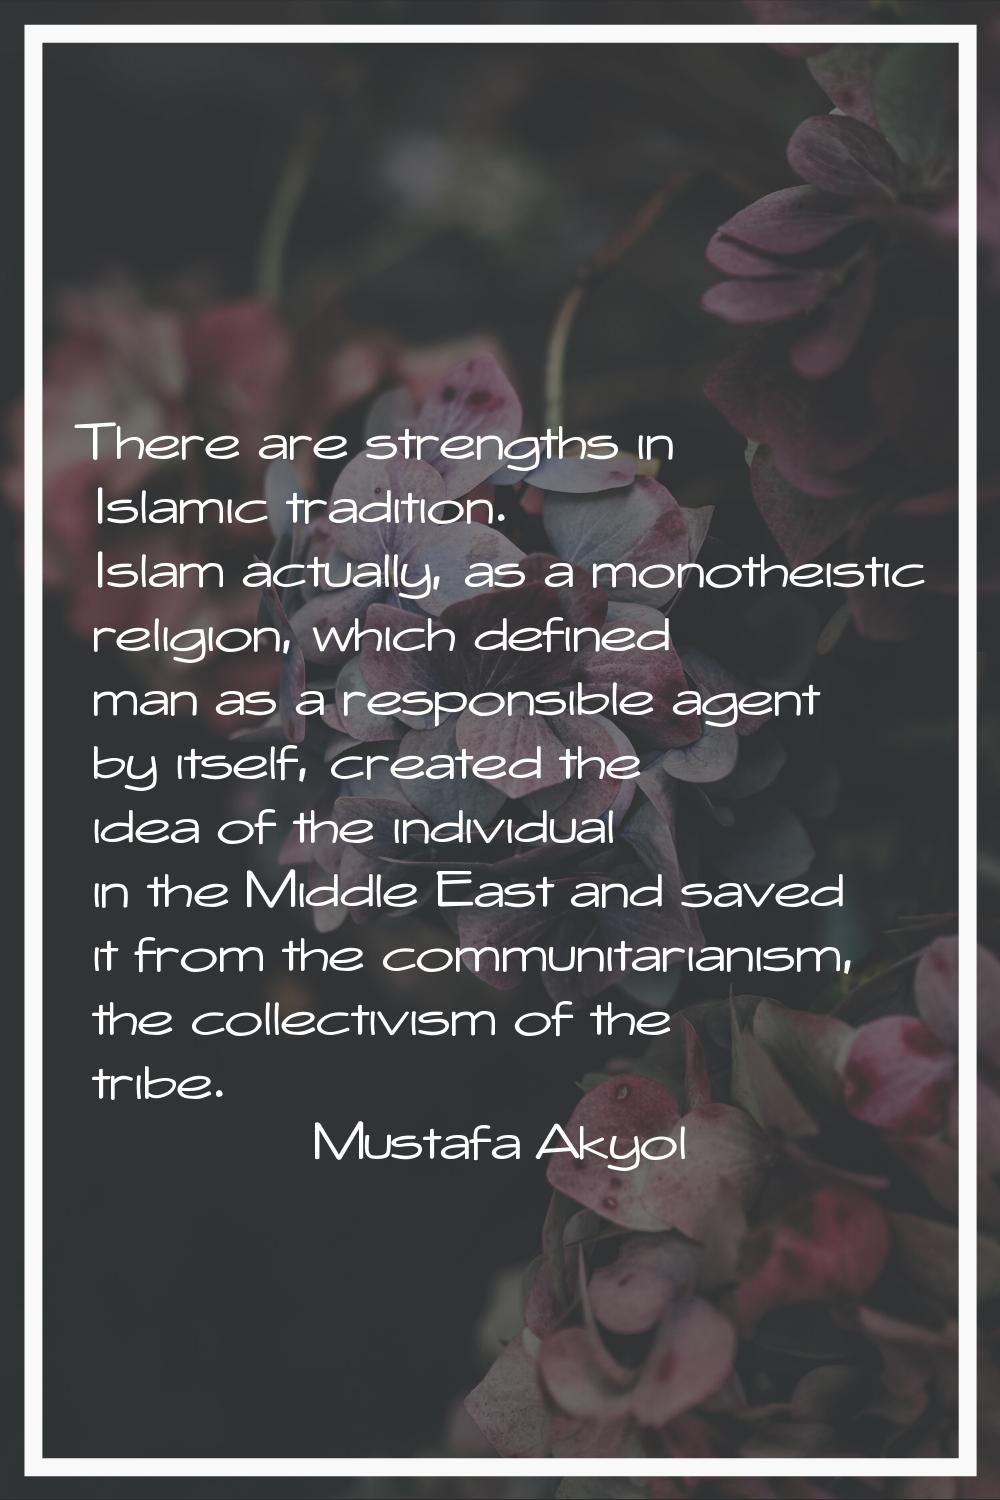 There are strengths in Islamic tradition. Islam actually, as a monotheistic religion, which defined